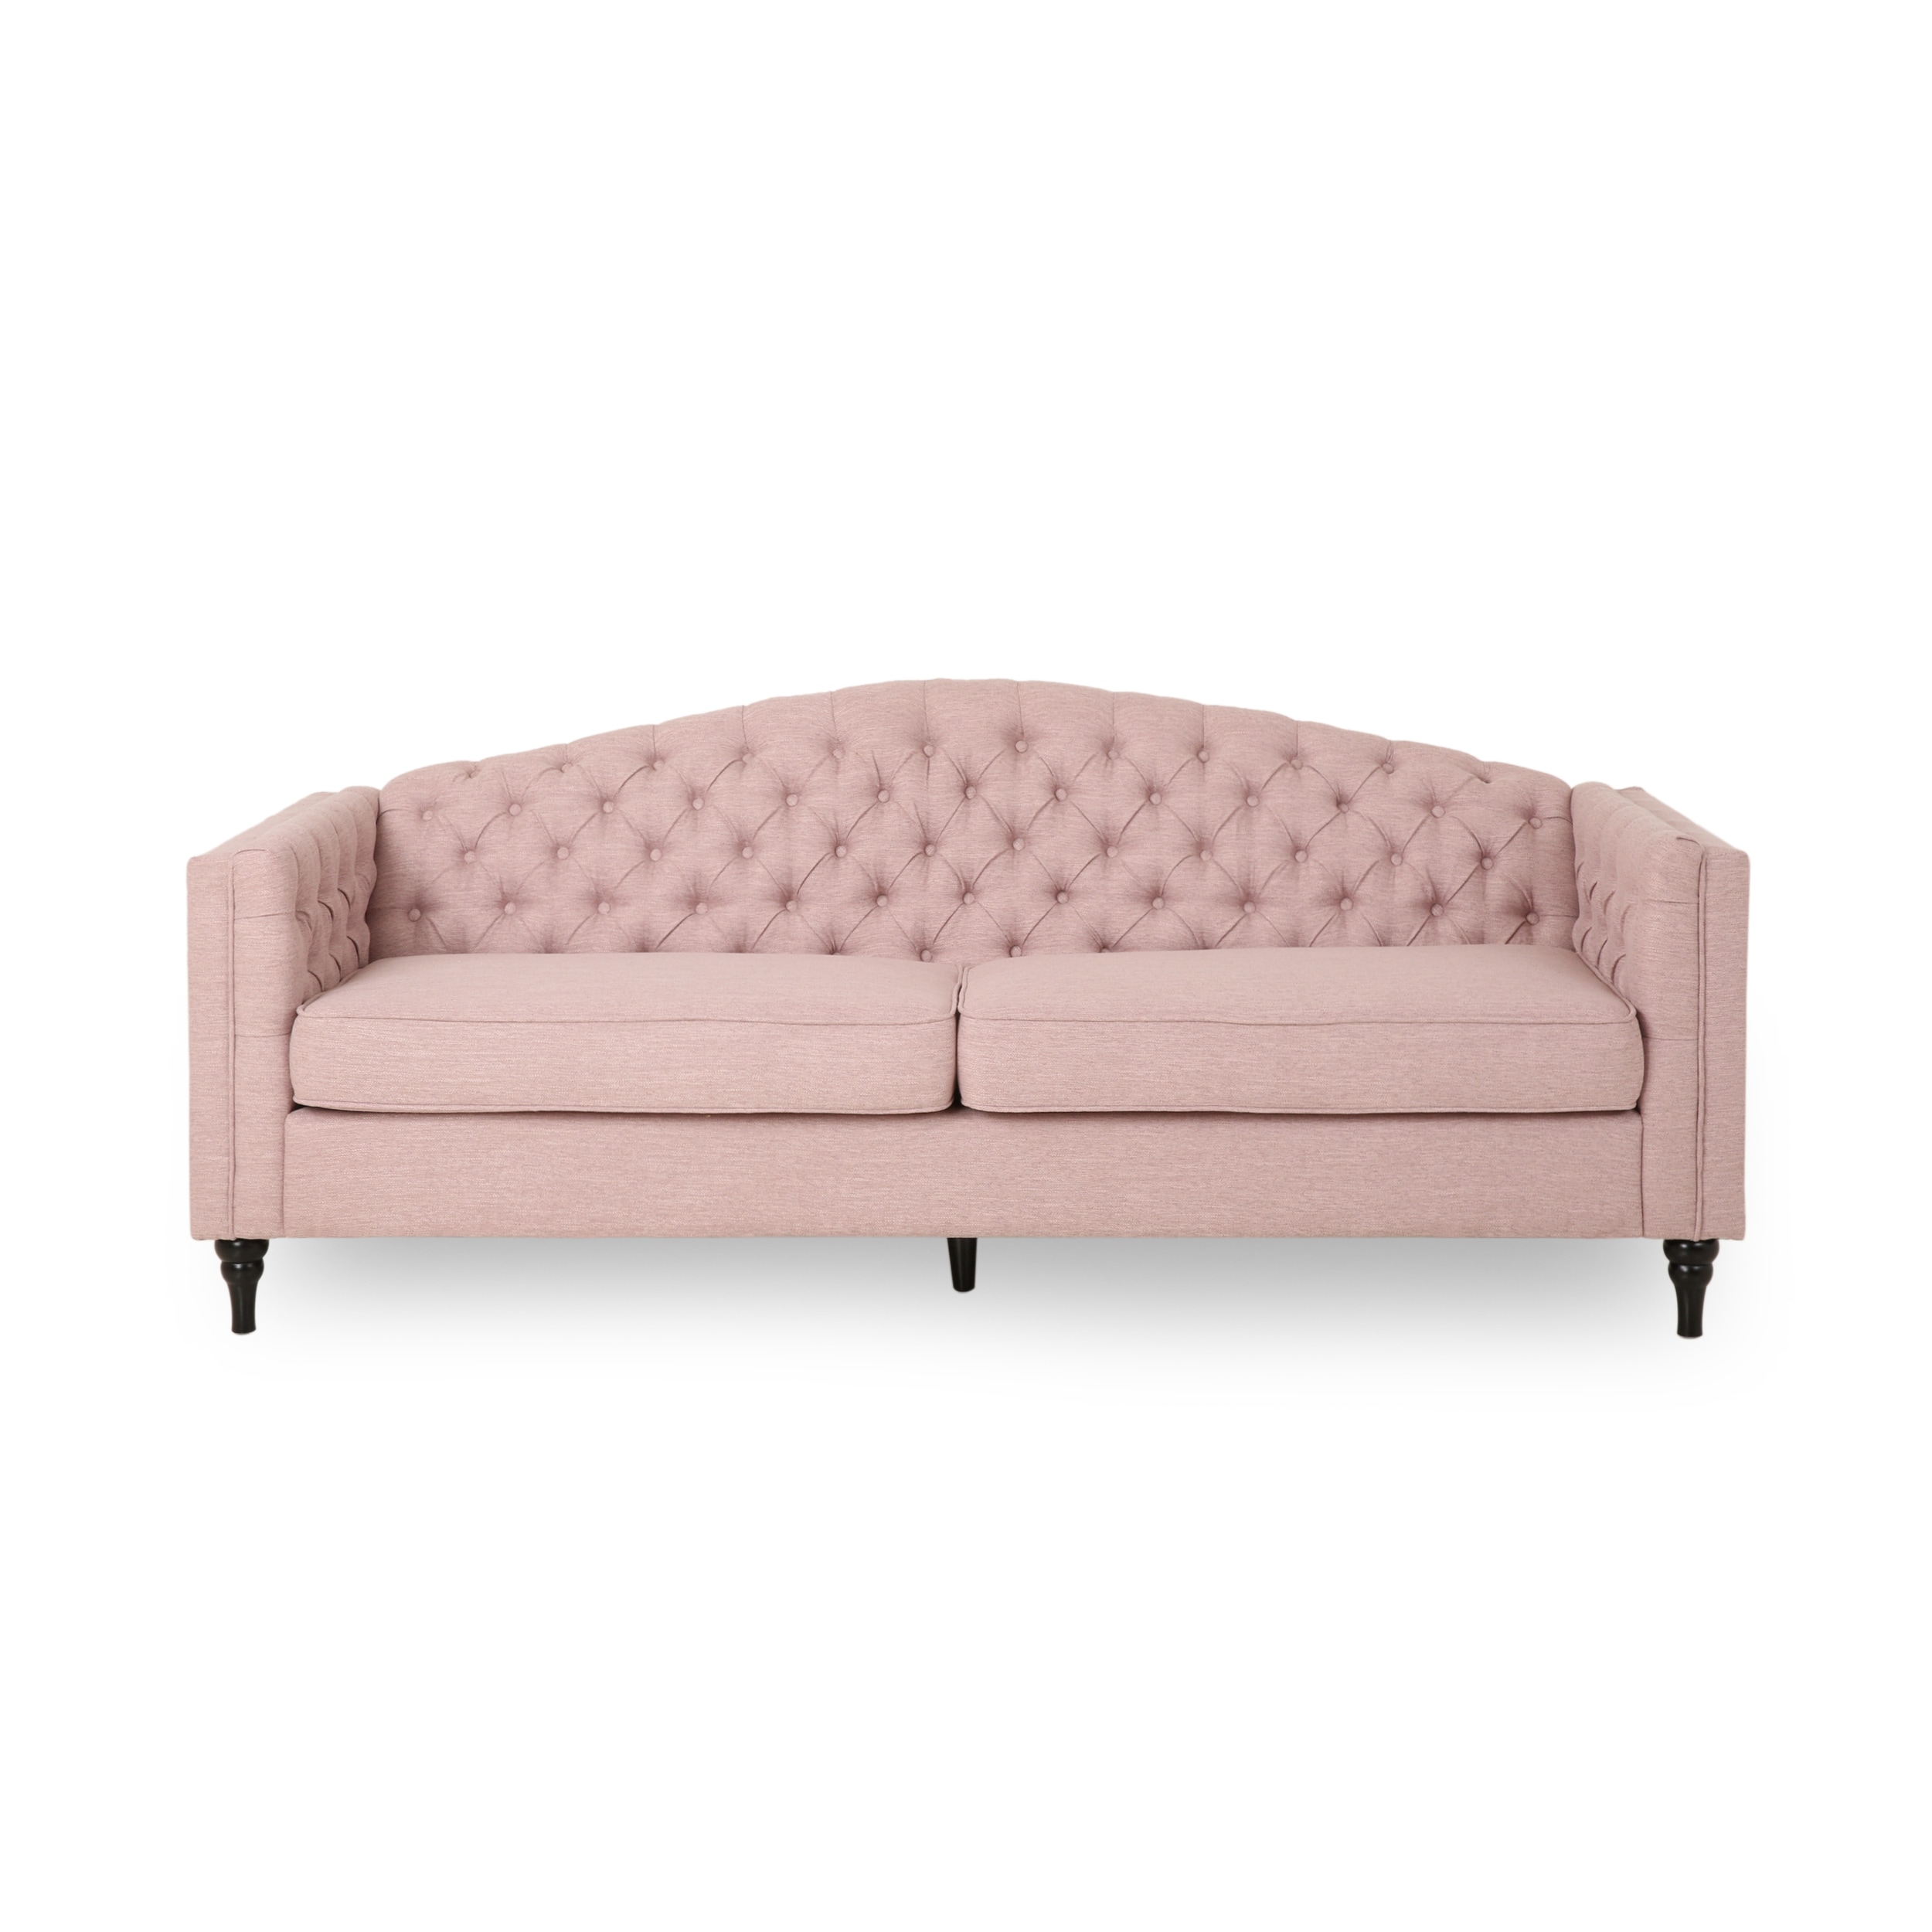 Antonia Couches, Sofas & Loveseats at Lowes.com